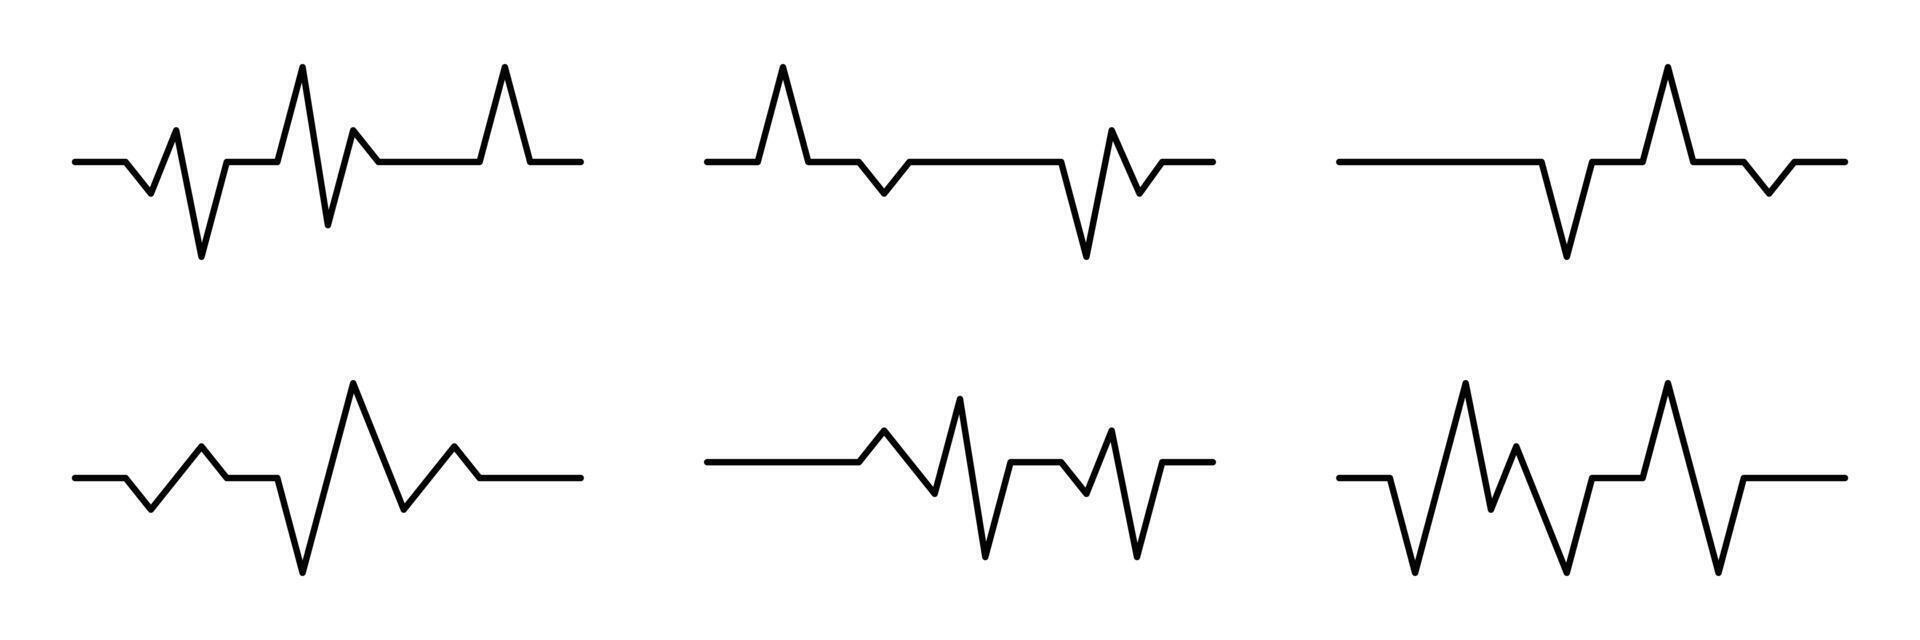 Heart rate monitor icon set, simple vector. Design design can be edited vector